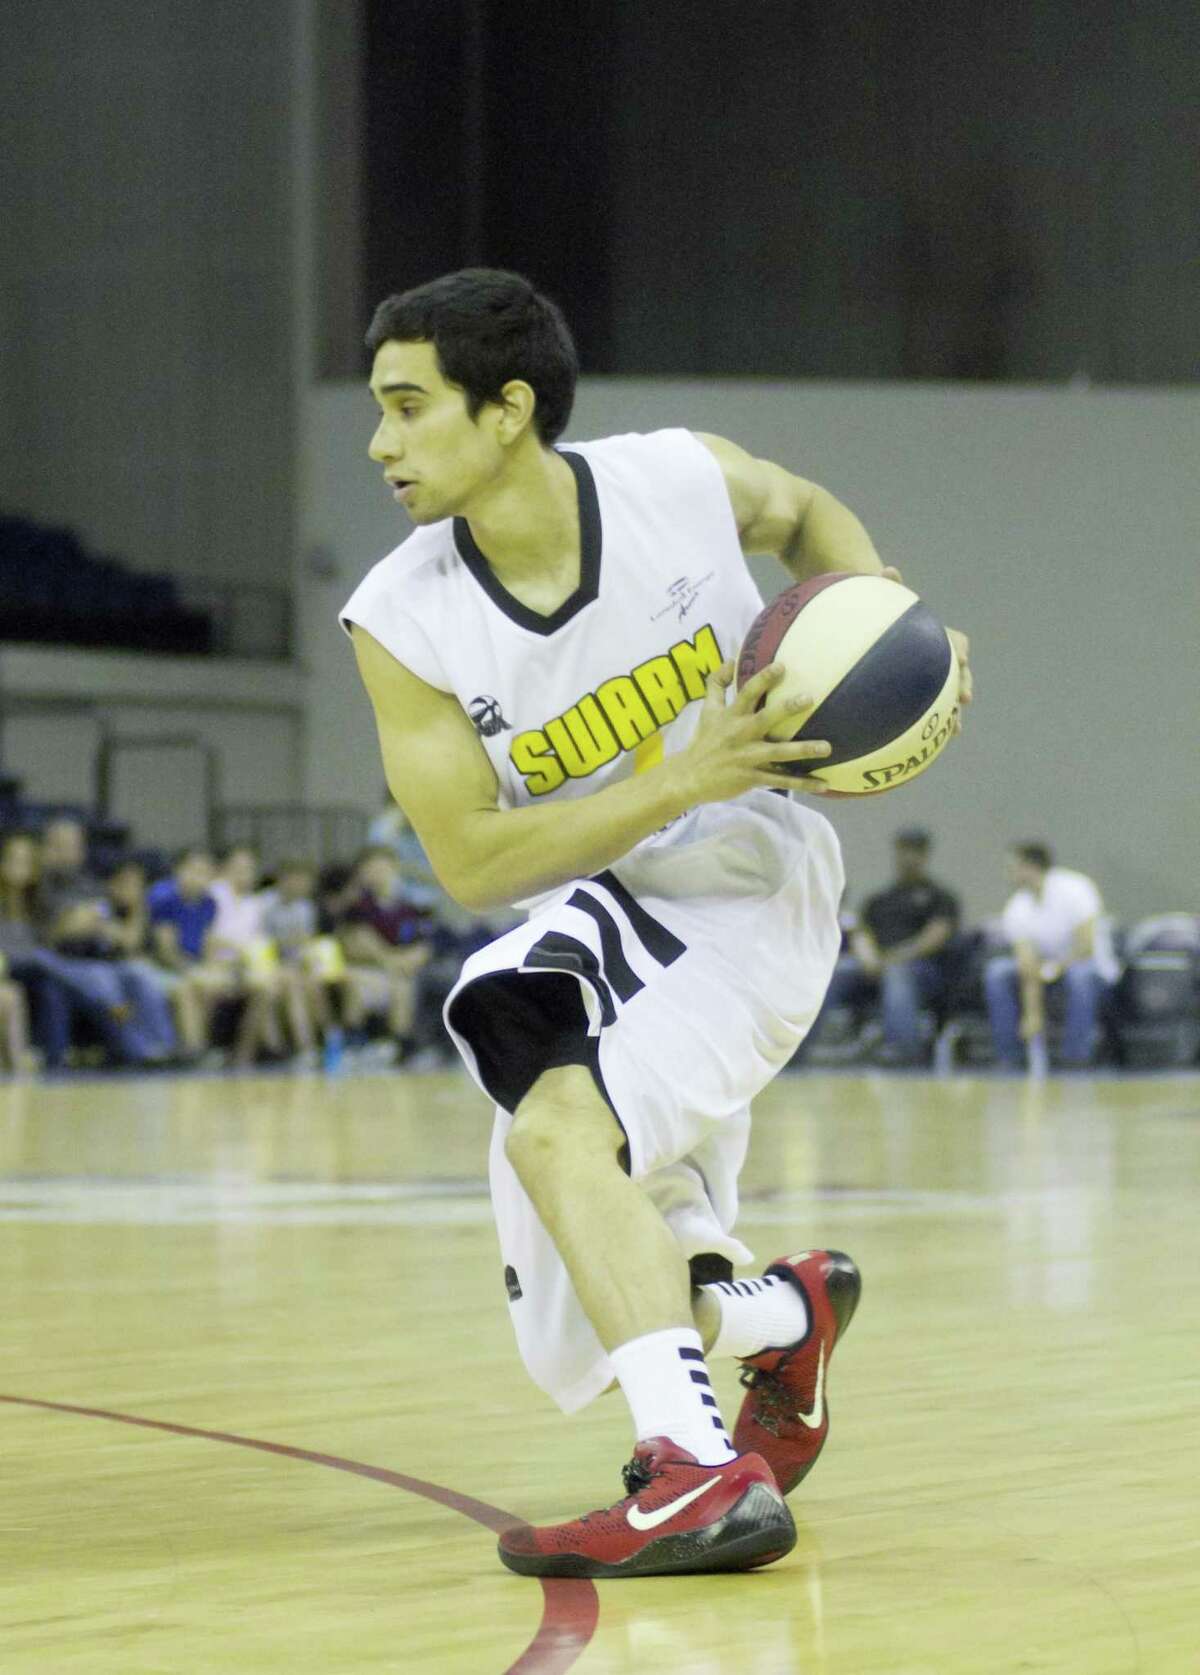 The Swarm are looking to stock next year’s team full of the best basketball players Laredo has to offer as they will hold a tryout Aug. 20. Alexander alumnus Andy Garcia is one of six players with a local tie to play for the team in two and a half seasons, and Laredo plans on drastically increasing that total this year.